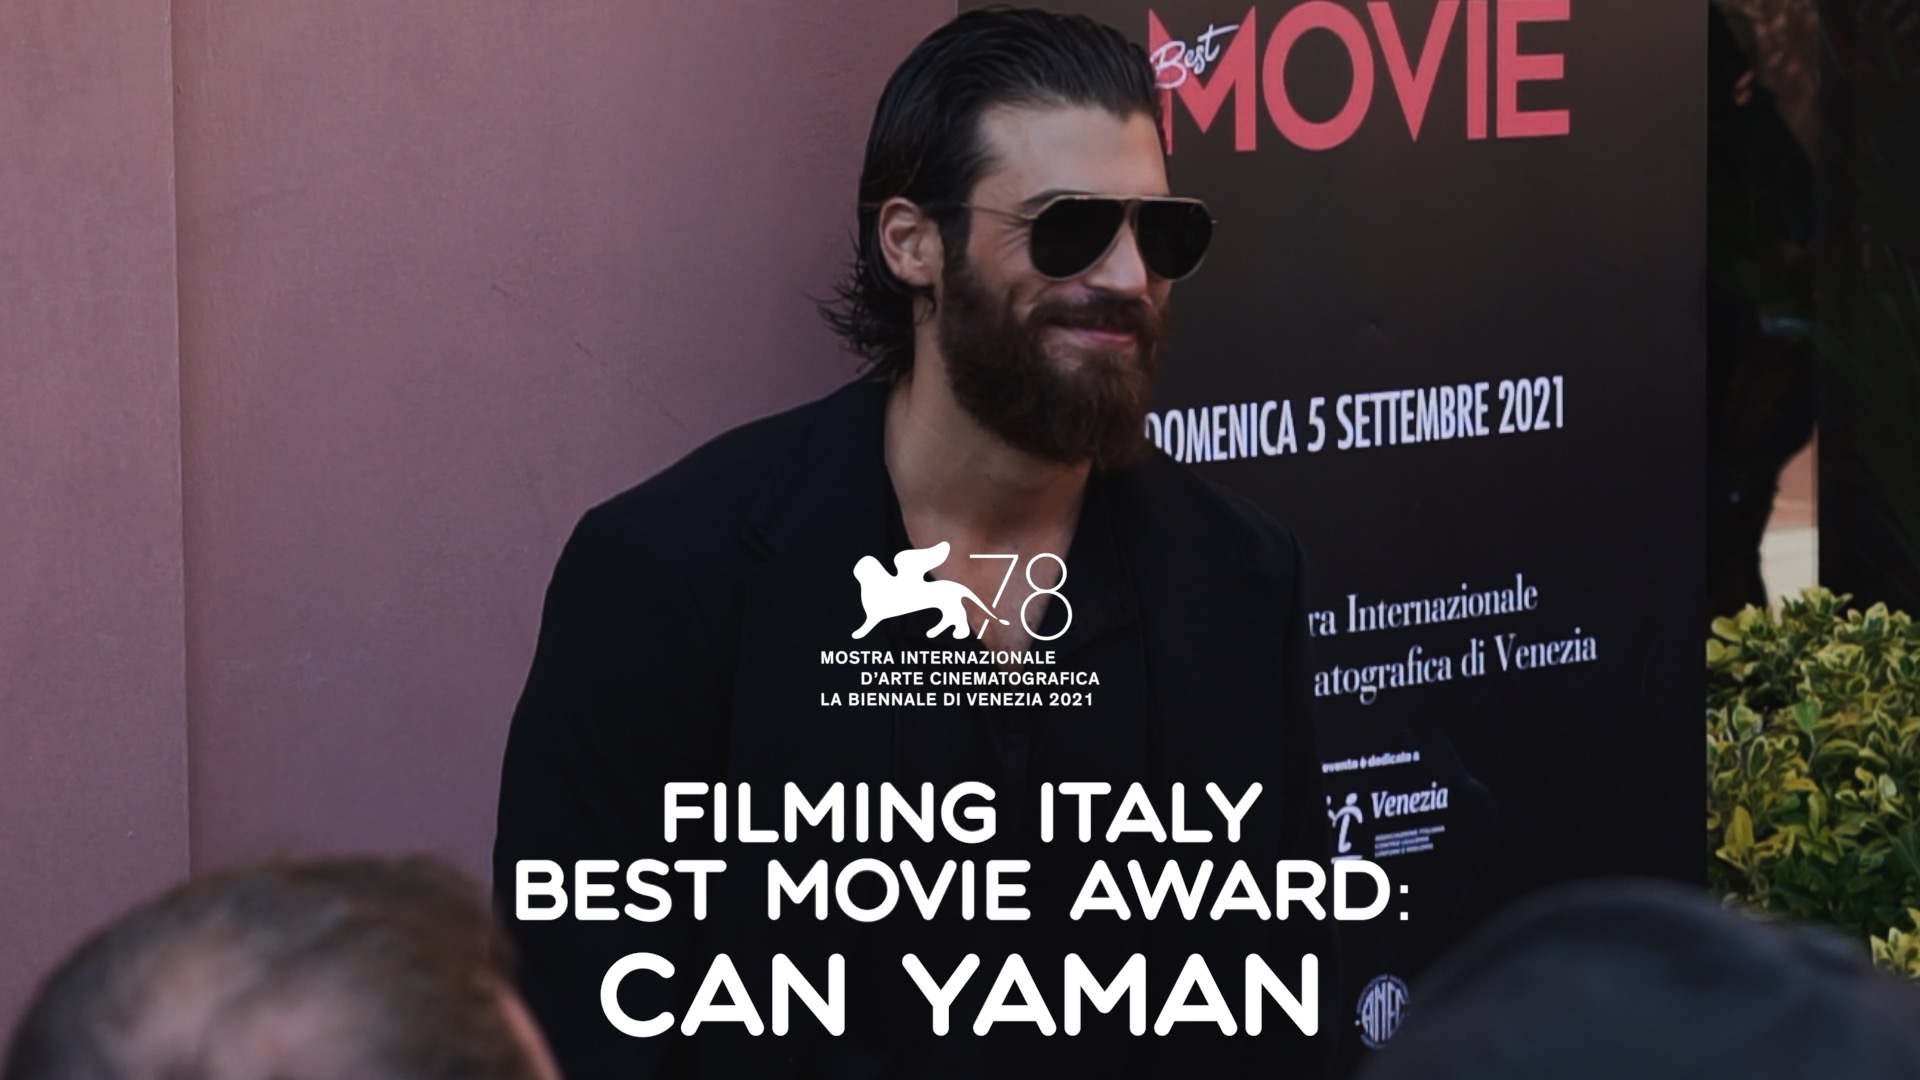 can yaman al filming italy best movie award 2021